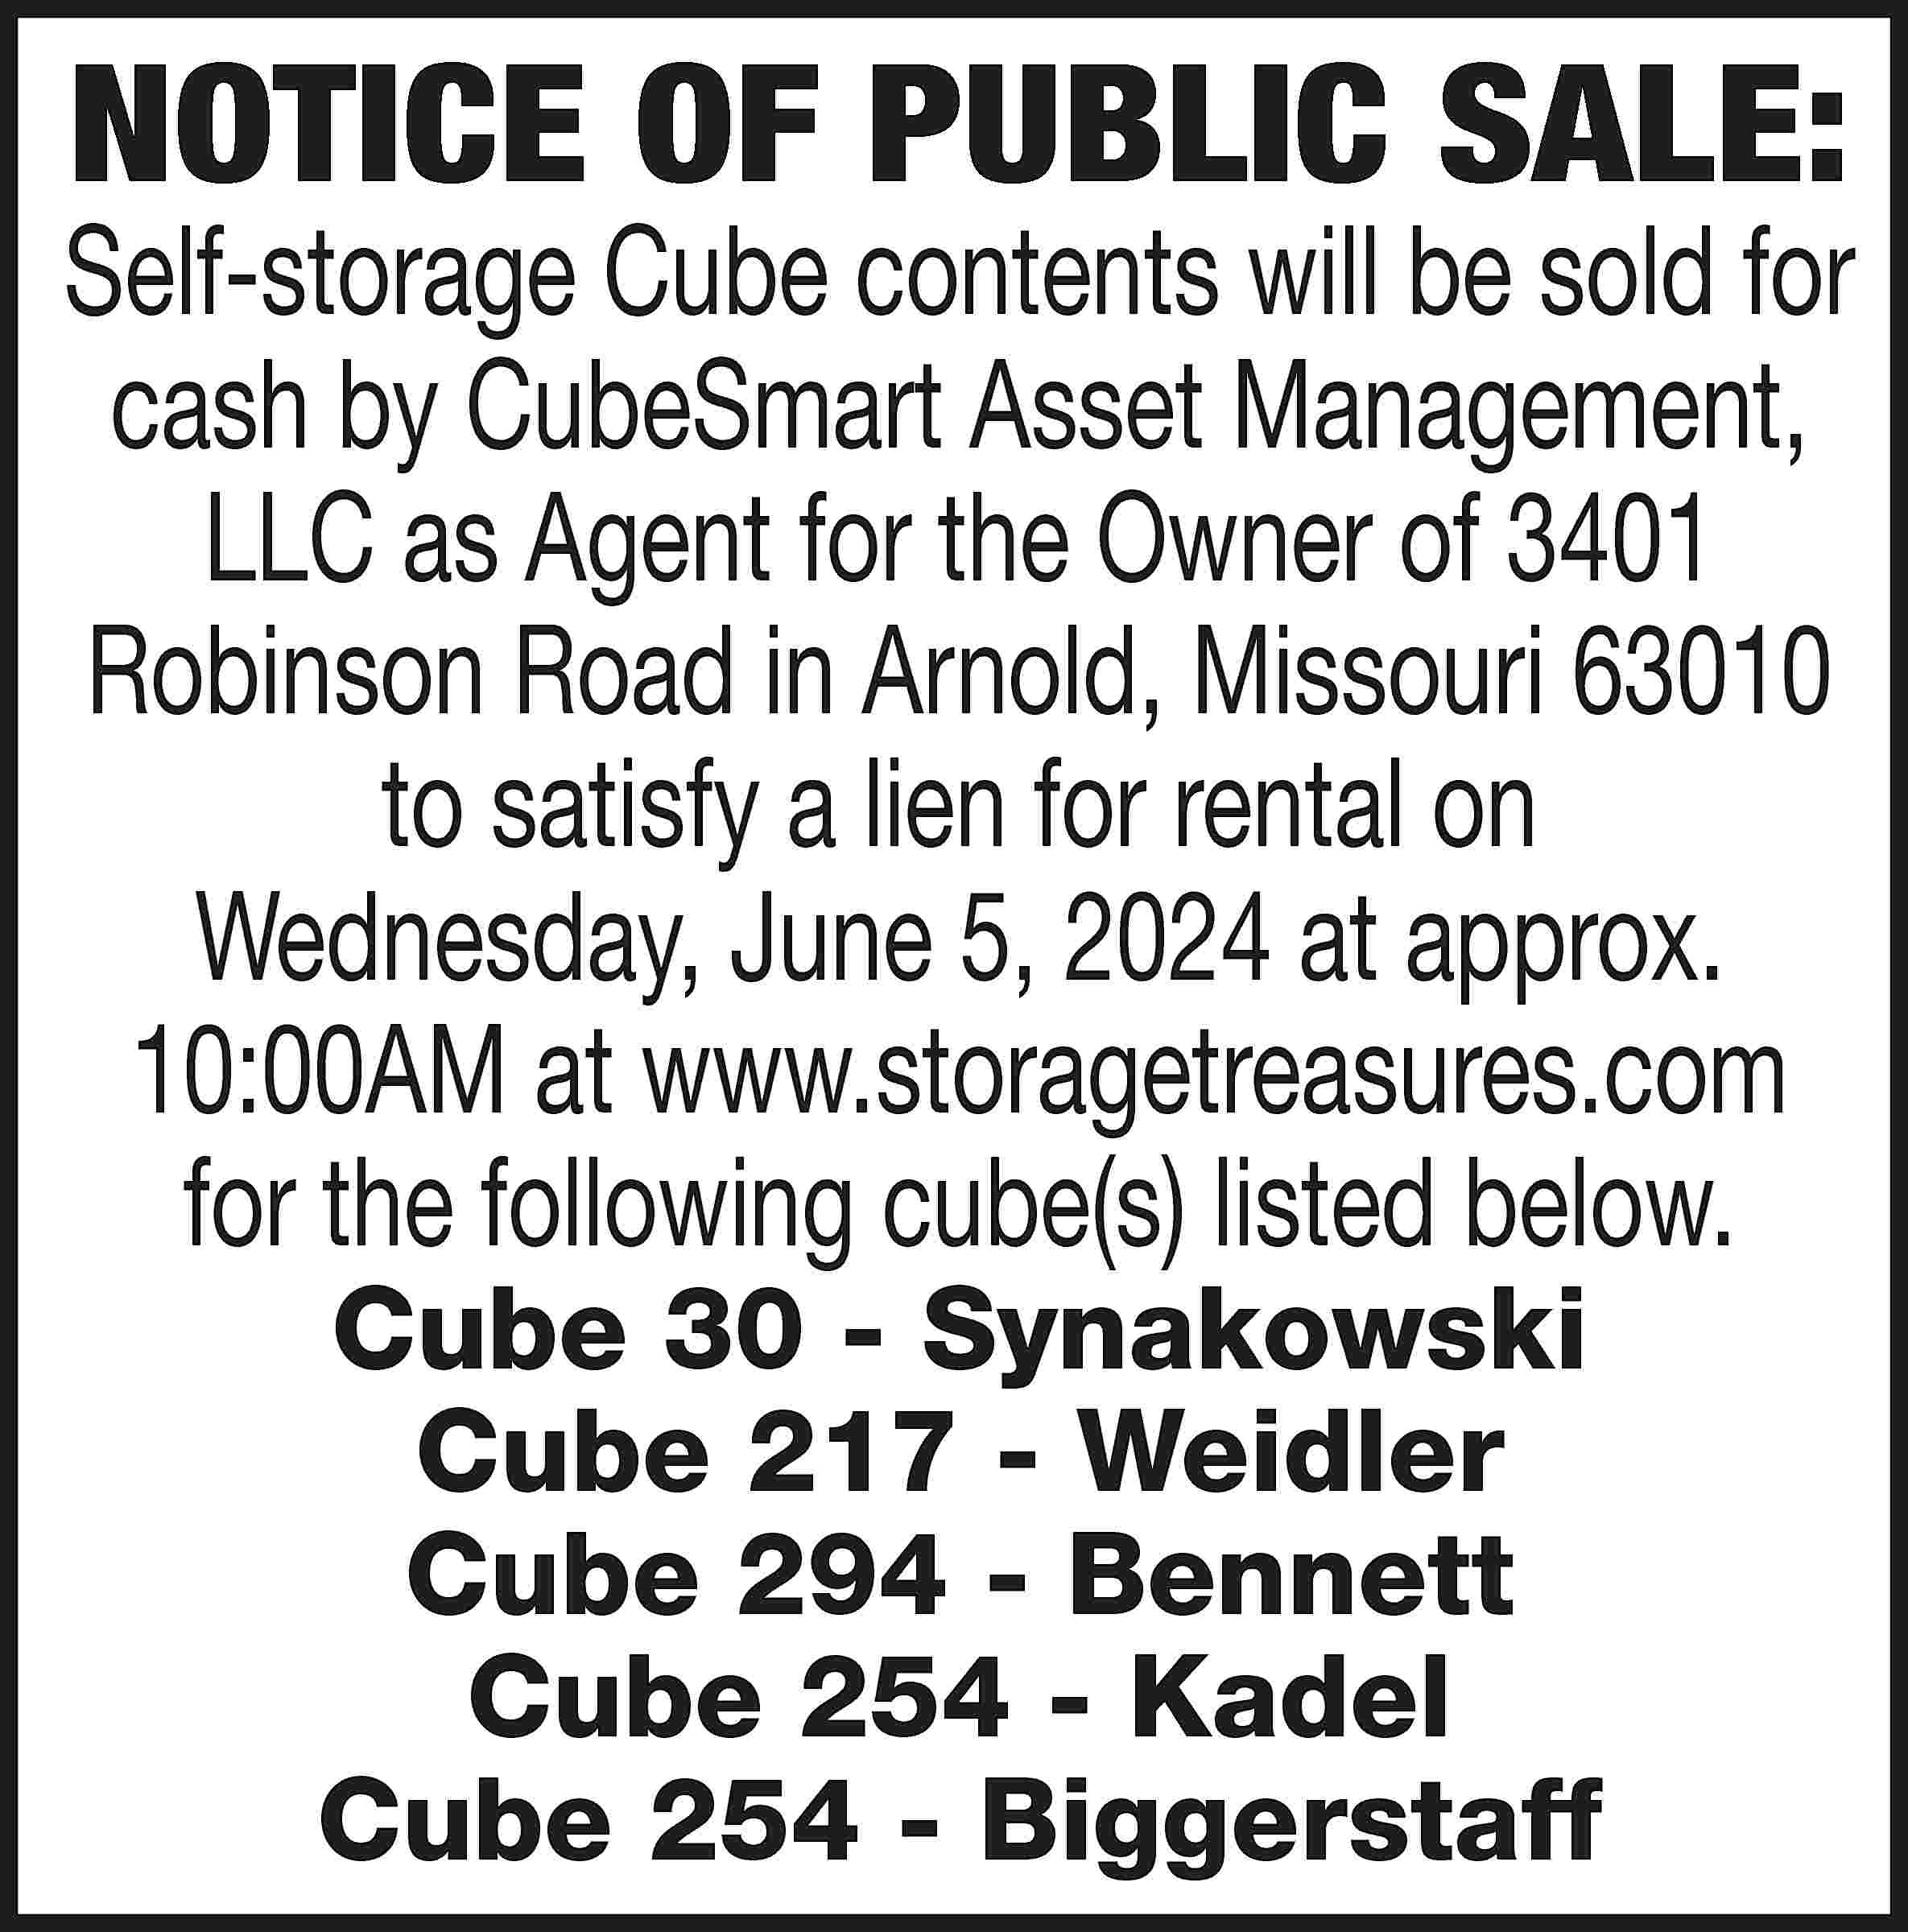 NOTICE OF PUBLIC SALE: Self-storage  NOTICE OF PUBLIC SALE: Self-storage Cube contents will be sold for cash by CubeSmart Asset Management, LLC as Agent for the Owner of 3401 Robinson Road in Arnold, Missouri 63010 to satisfy a lien for rental on Wednesday, June 5, 2024 at approx. 10:00AM at www.storagetreasures.com for the following cube(s) listed below. Cube 30 - Synakowski Cube 217 - Weidler Cube 294 - Bennett Cube 254 - Kadel Cube 254 - Biggerstaff